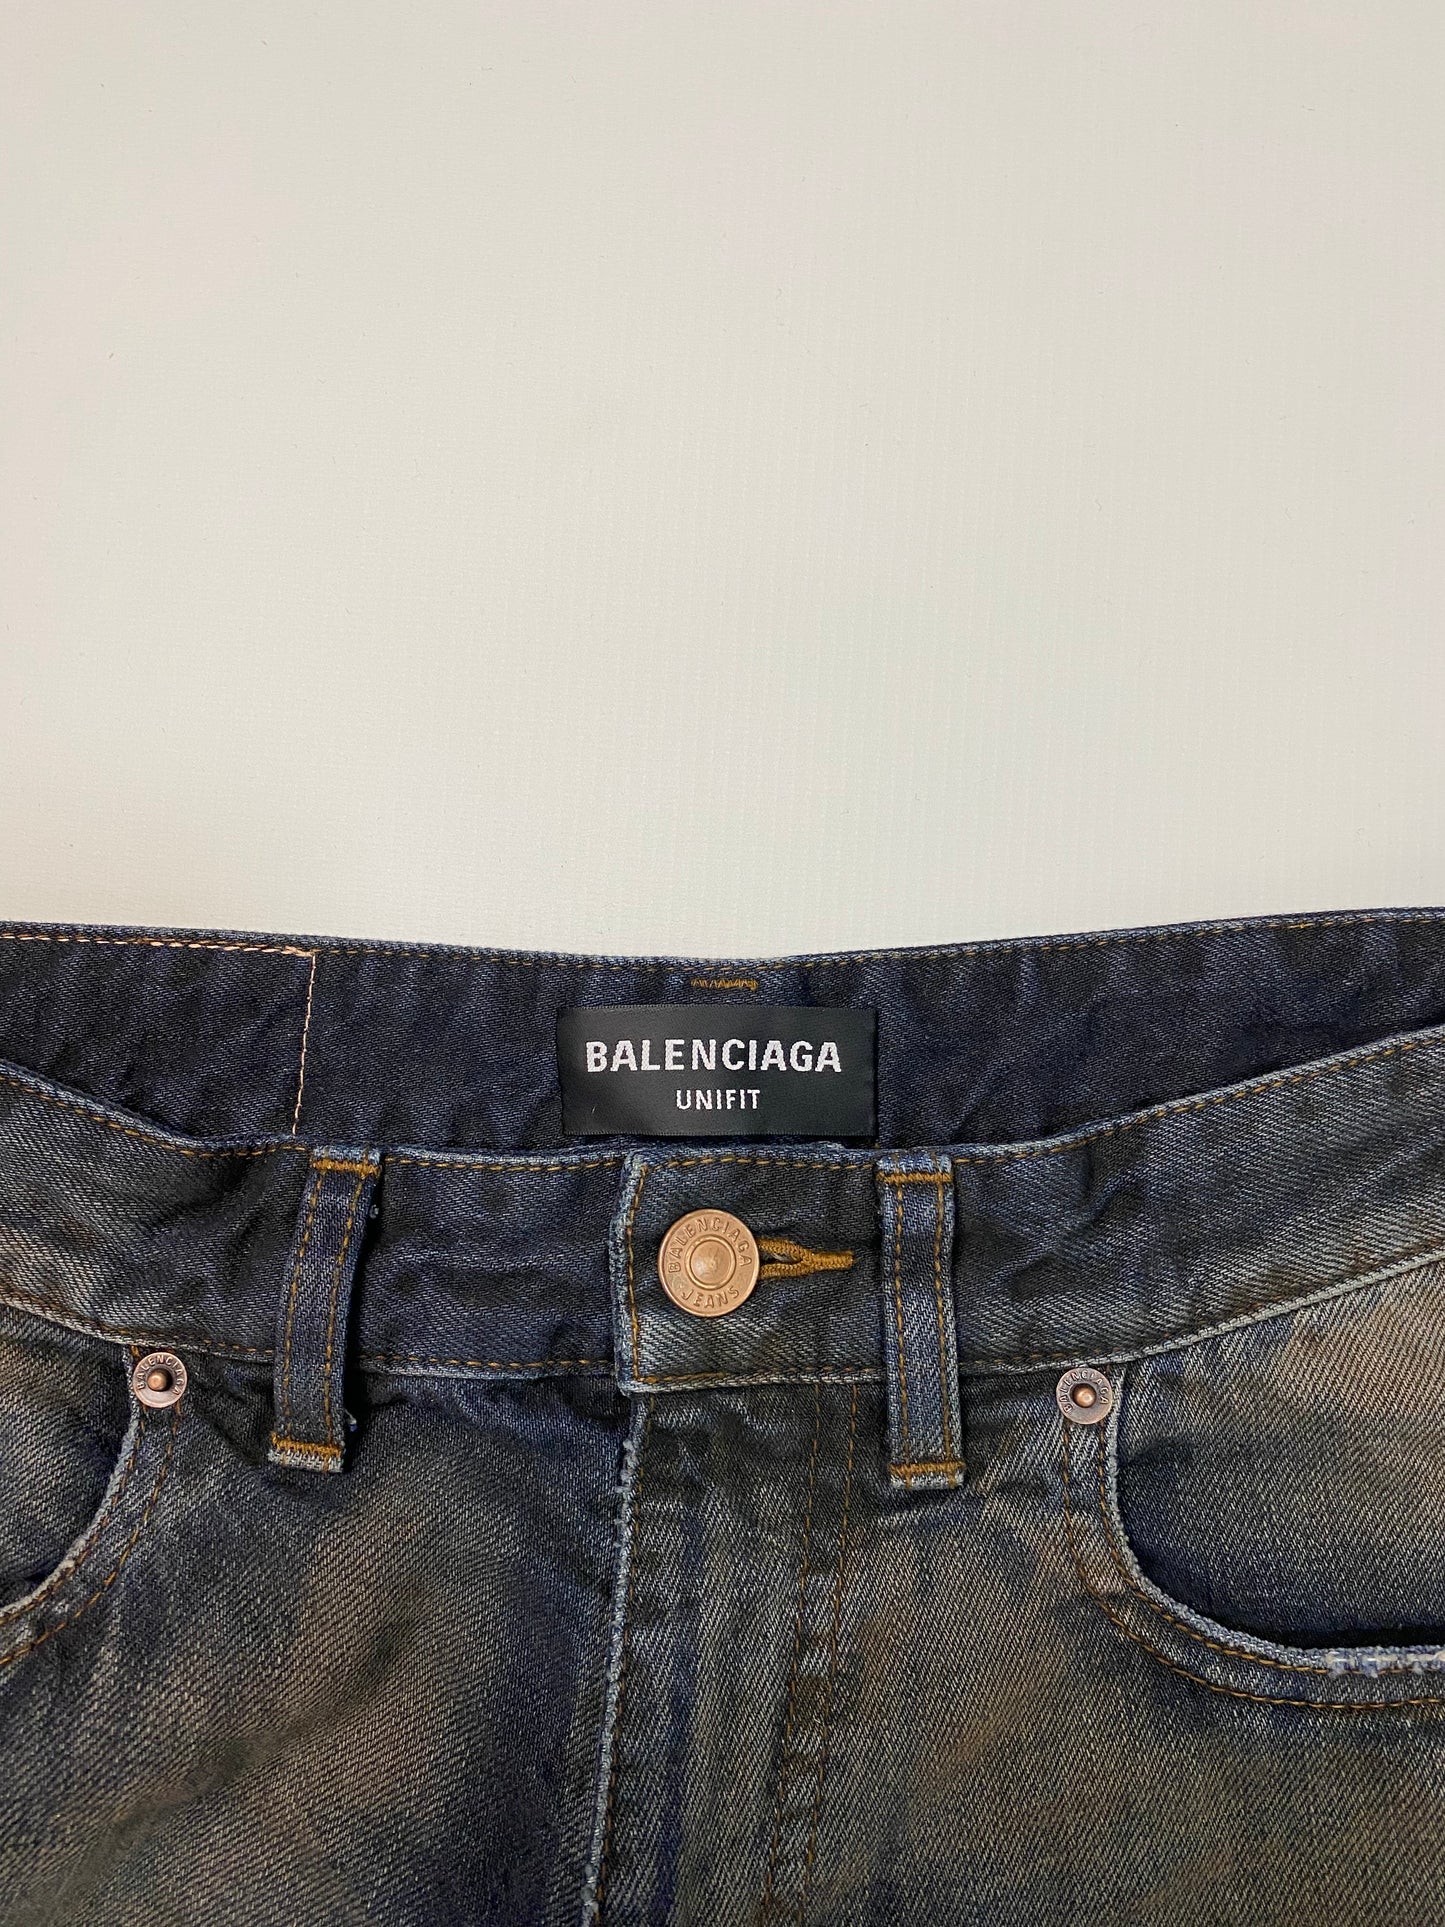 Balenciaga AW22 distressed destroyed skater jeans dirty blue wash SZ:S